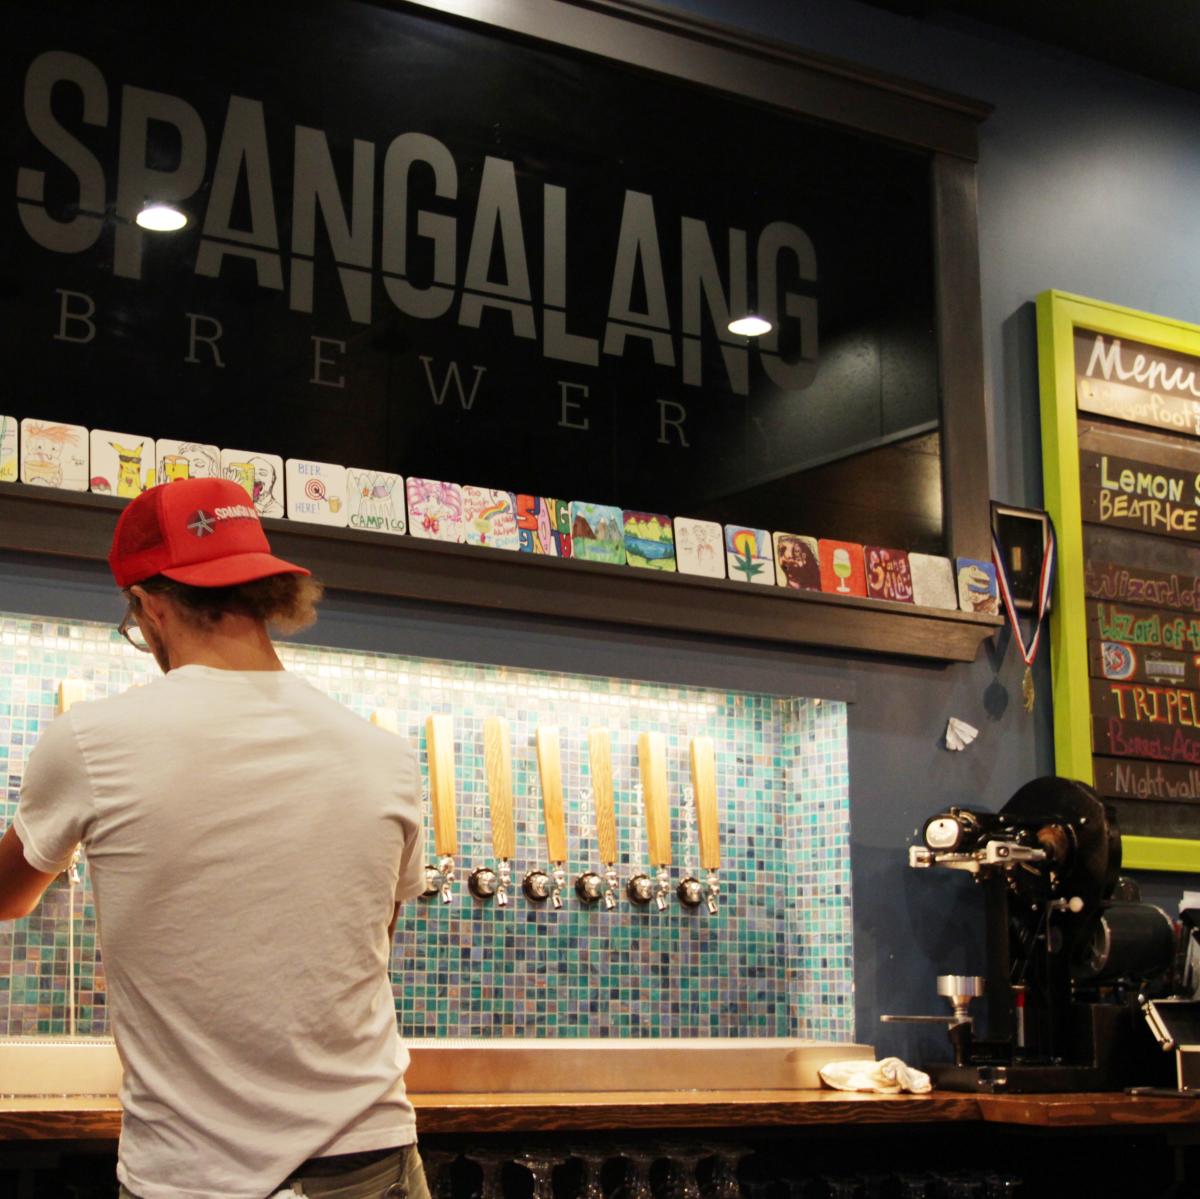 Copy of spangalang-brewery-tap-room